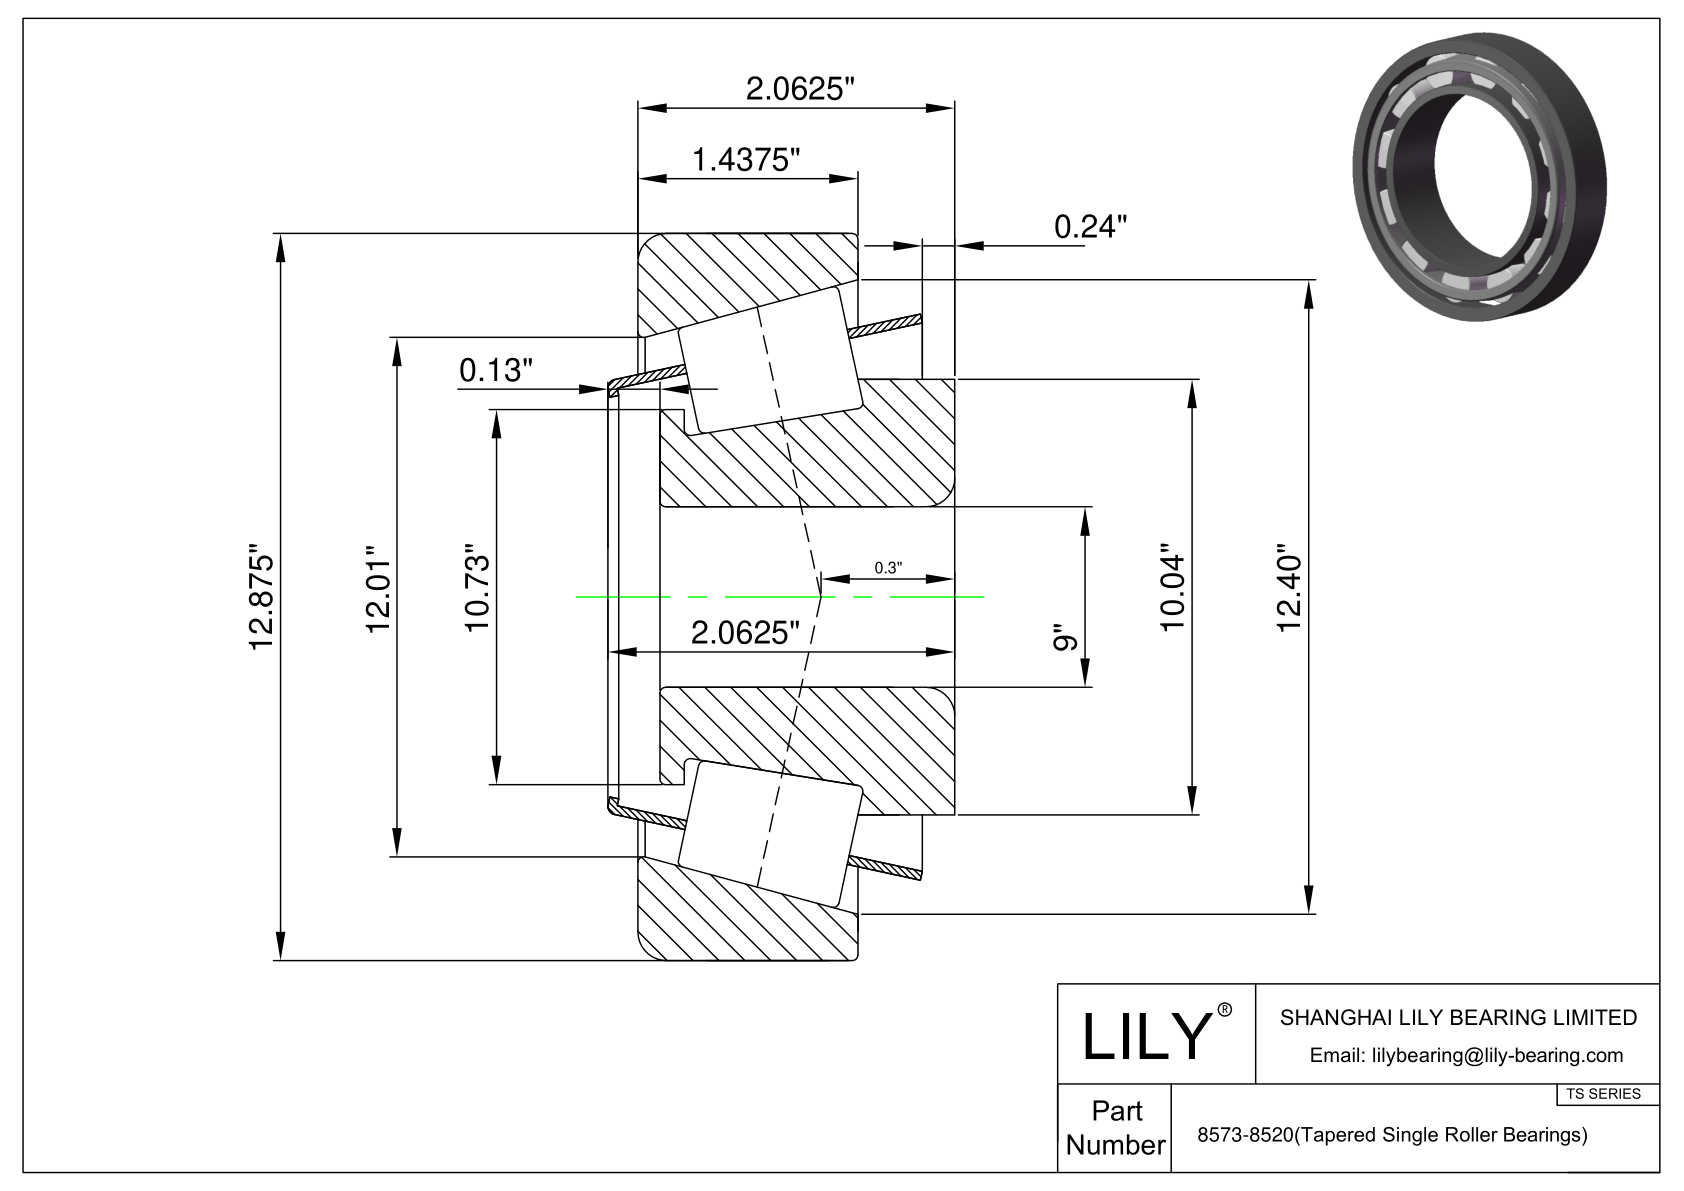 8573-8520 TS (Tapered Single Roller Bearings) (Imperial) cad drawing